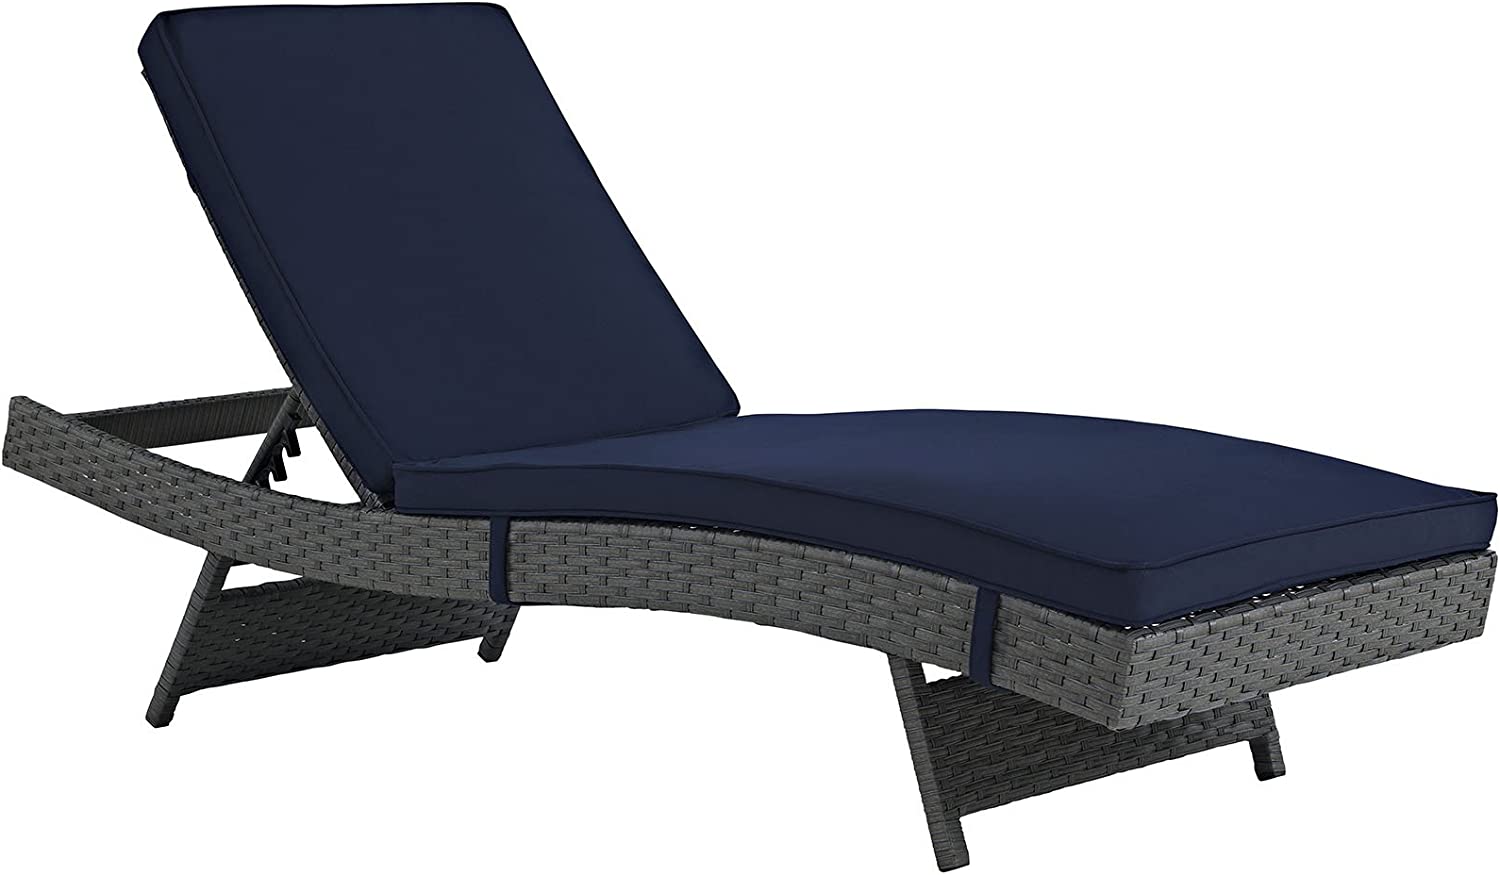 Modway Sojourn Wicker Rattan Outdoor Patio Sunbrella Fabric Chaise Lounge in Canvas Tuscan